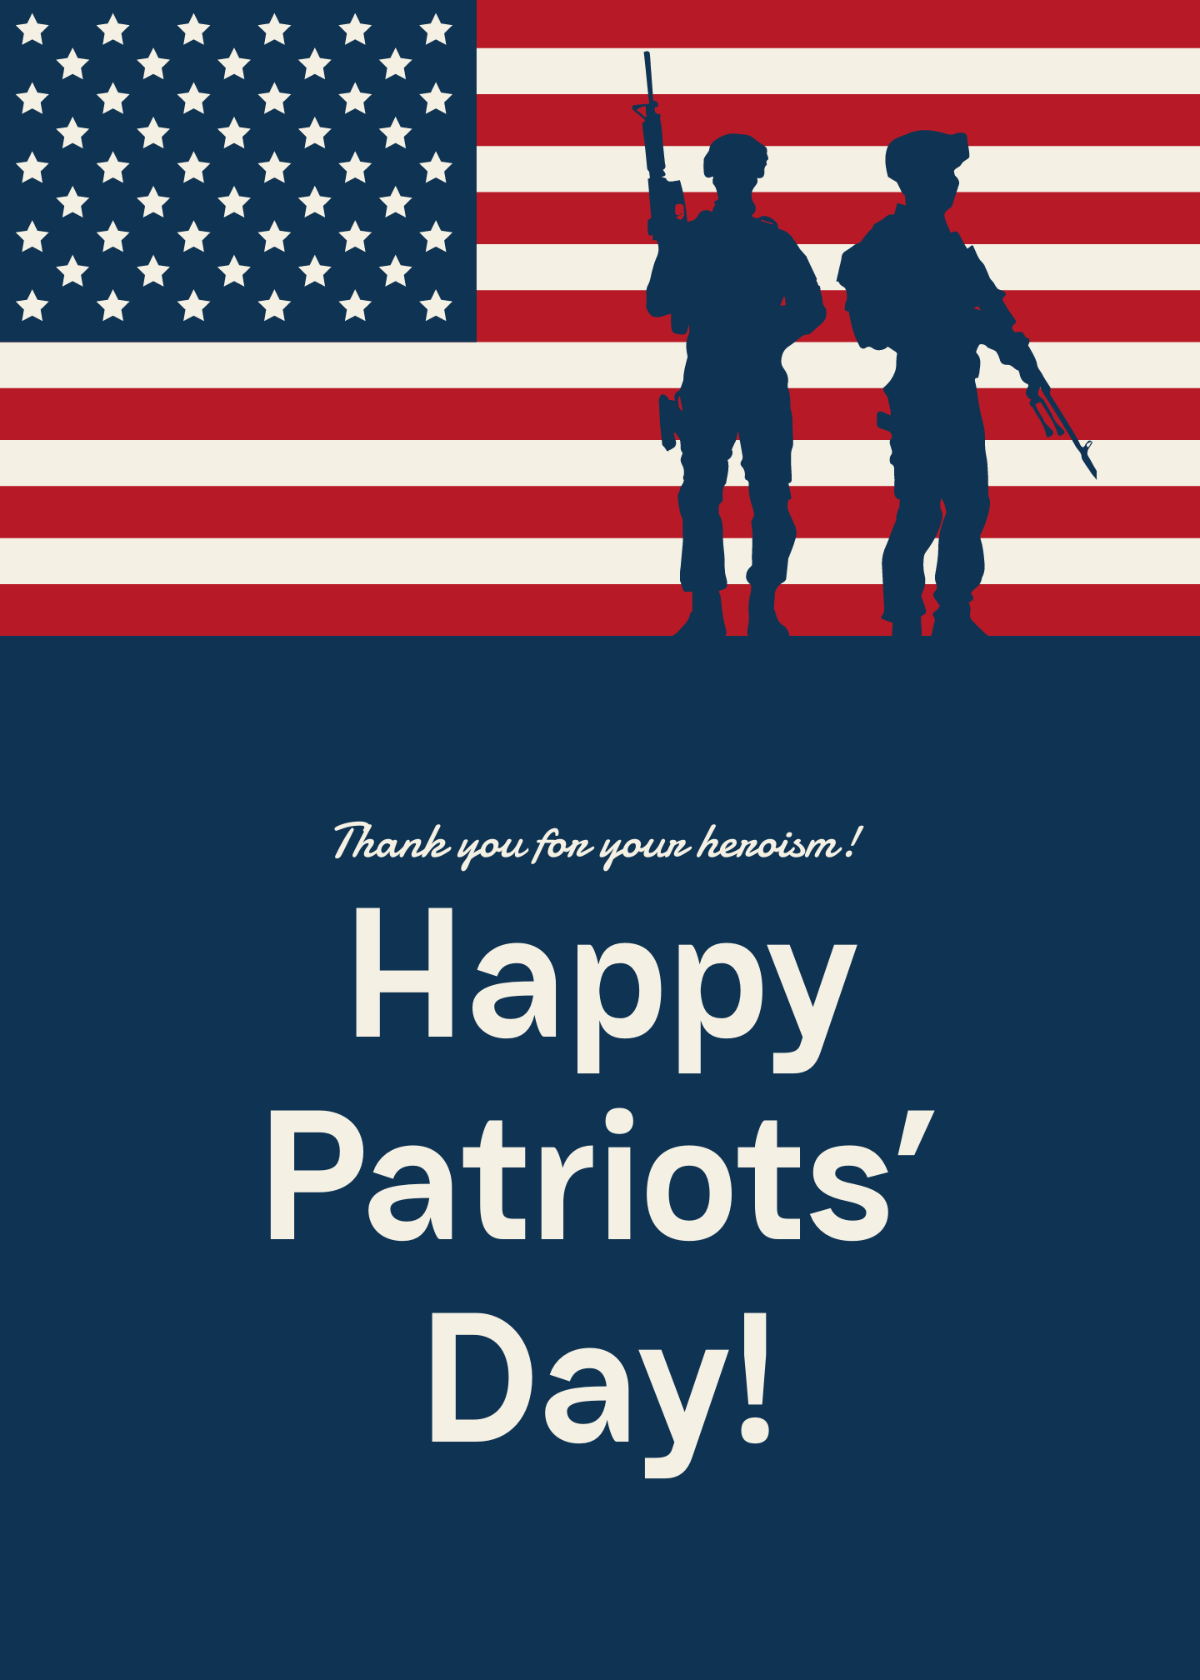 Patriots' Day Card Template